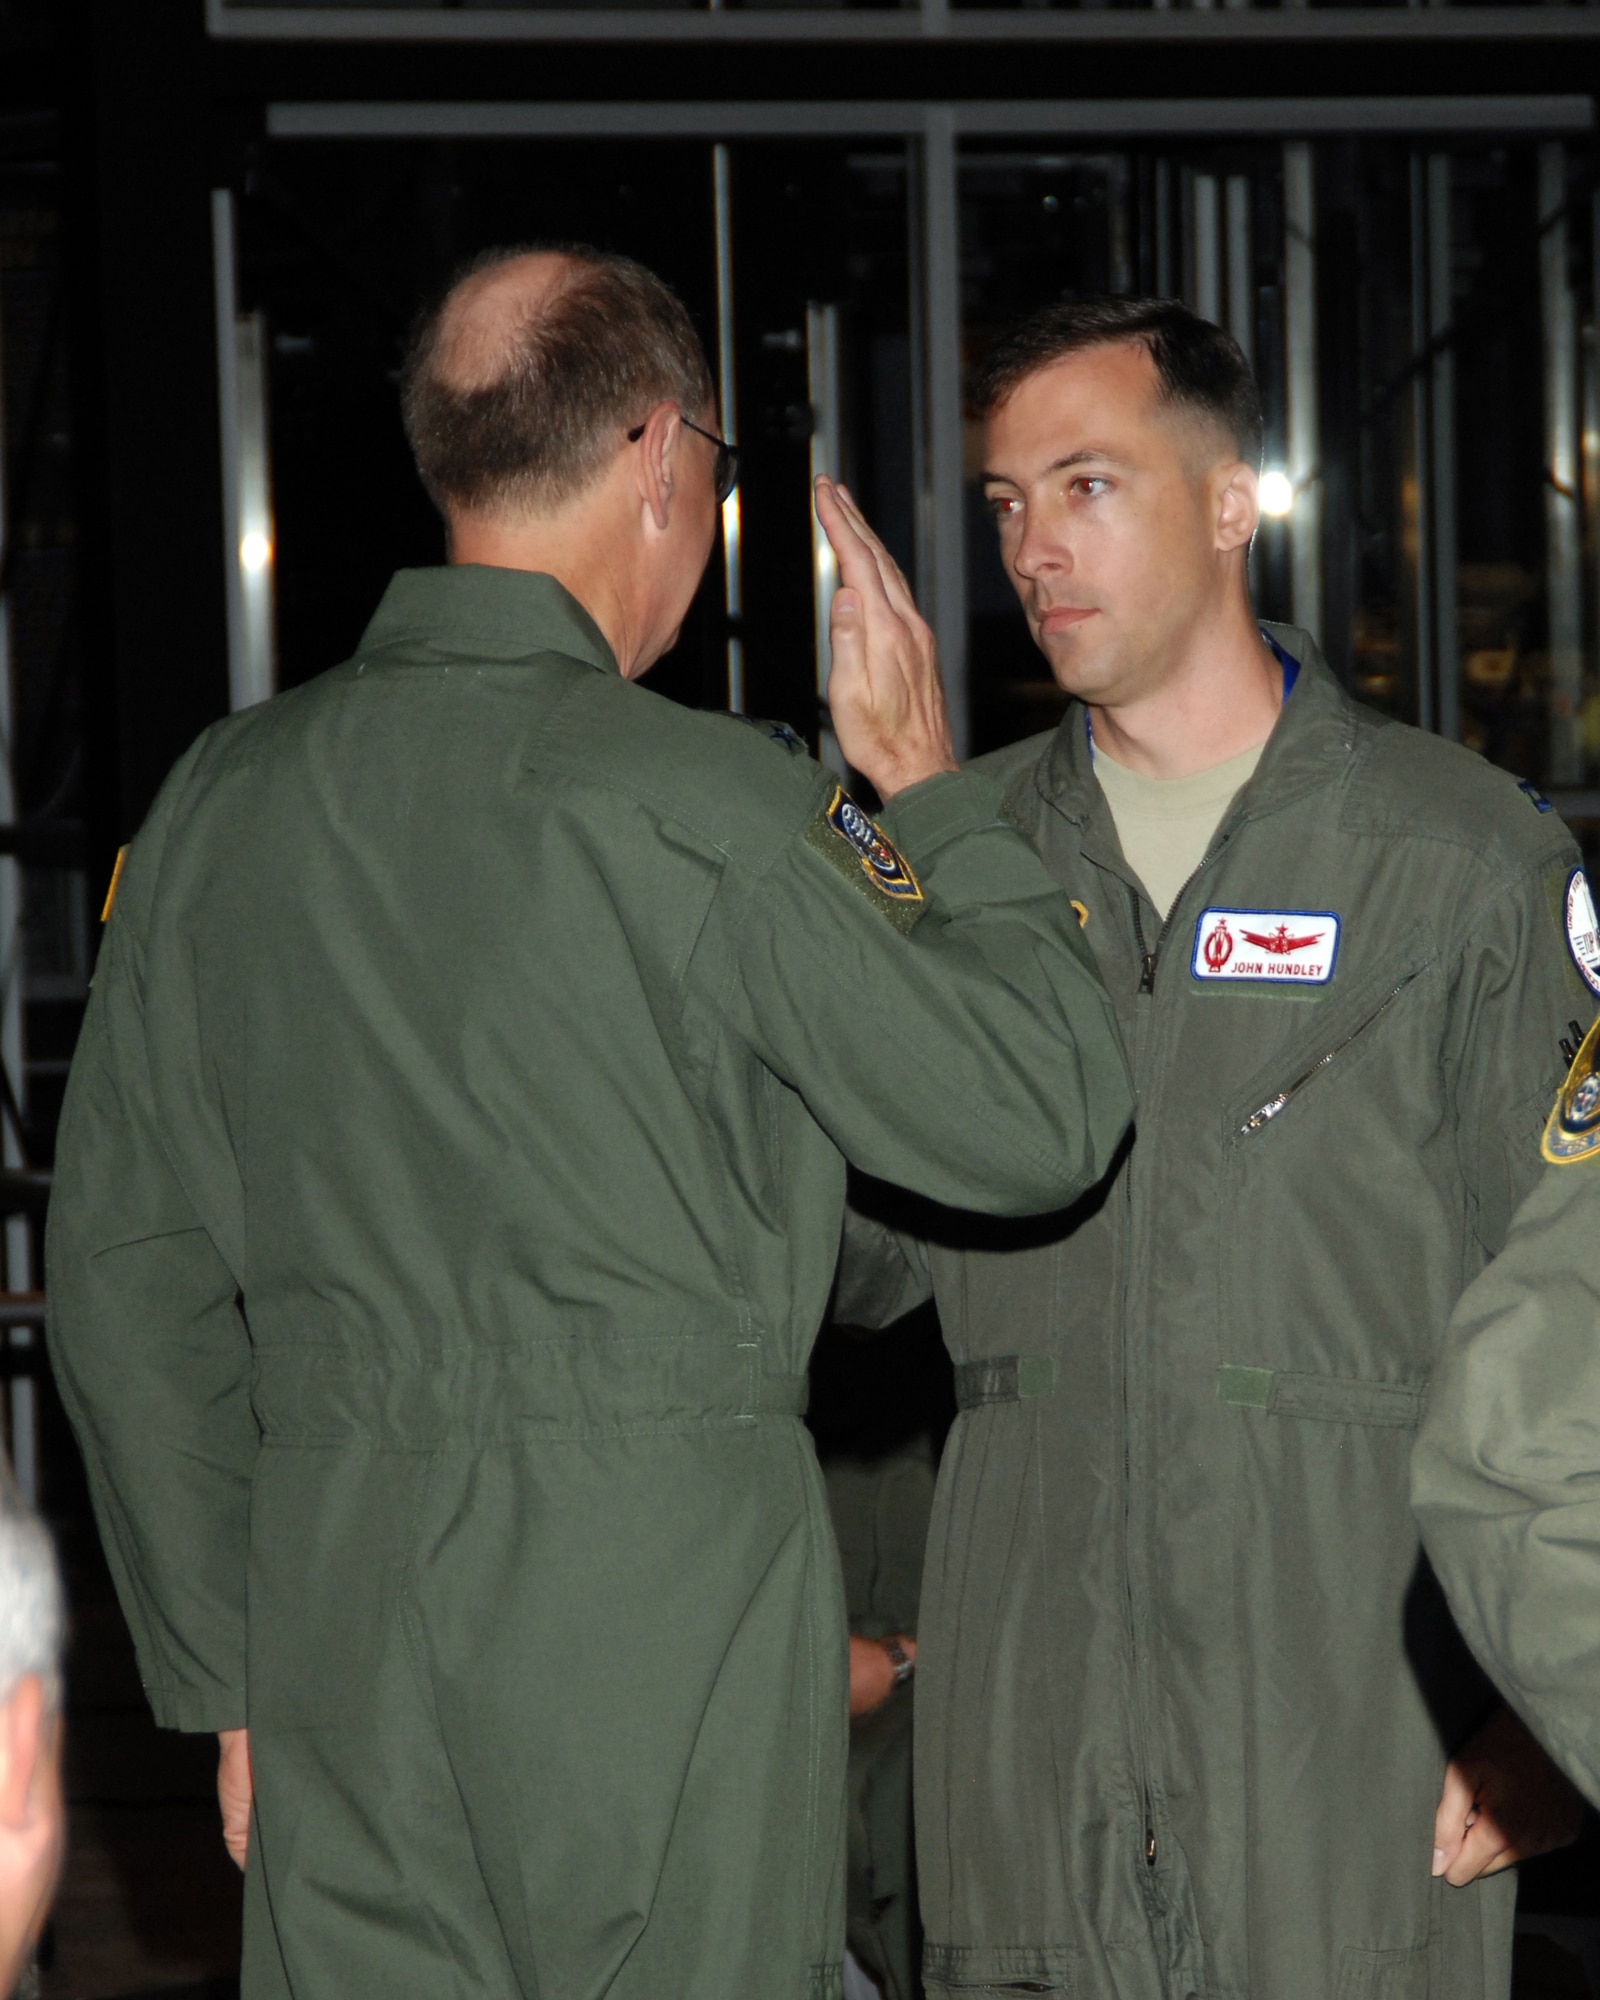 Capt. John Hundley receives his missile badge from Gen. Robert Kehler, commander of Air Force Space Command. Captain Hundley is assigned to the 576th Flight Test Squadron at Vandenberg Air Force Base, Calif.  He received the badge during the Peacekeeper Missile dedication ceremony June 6 at the National Museum of the United States Air Force. (U.S. Air Force photo/Ben Strasser)